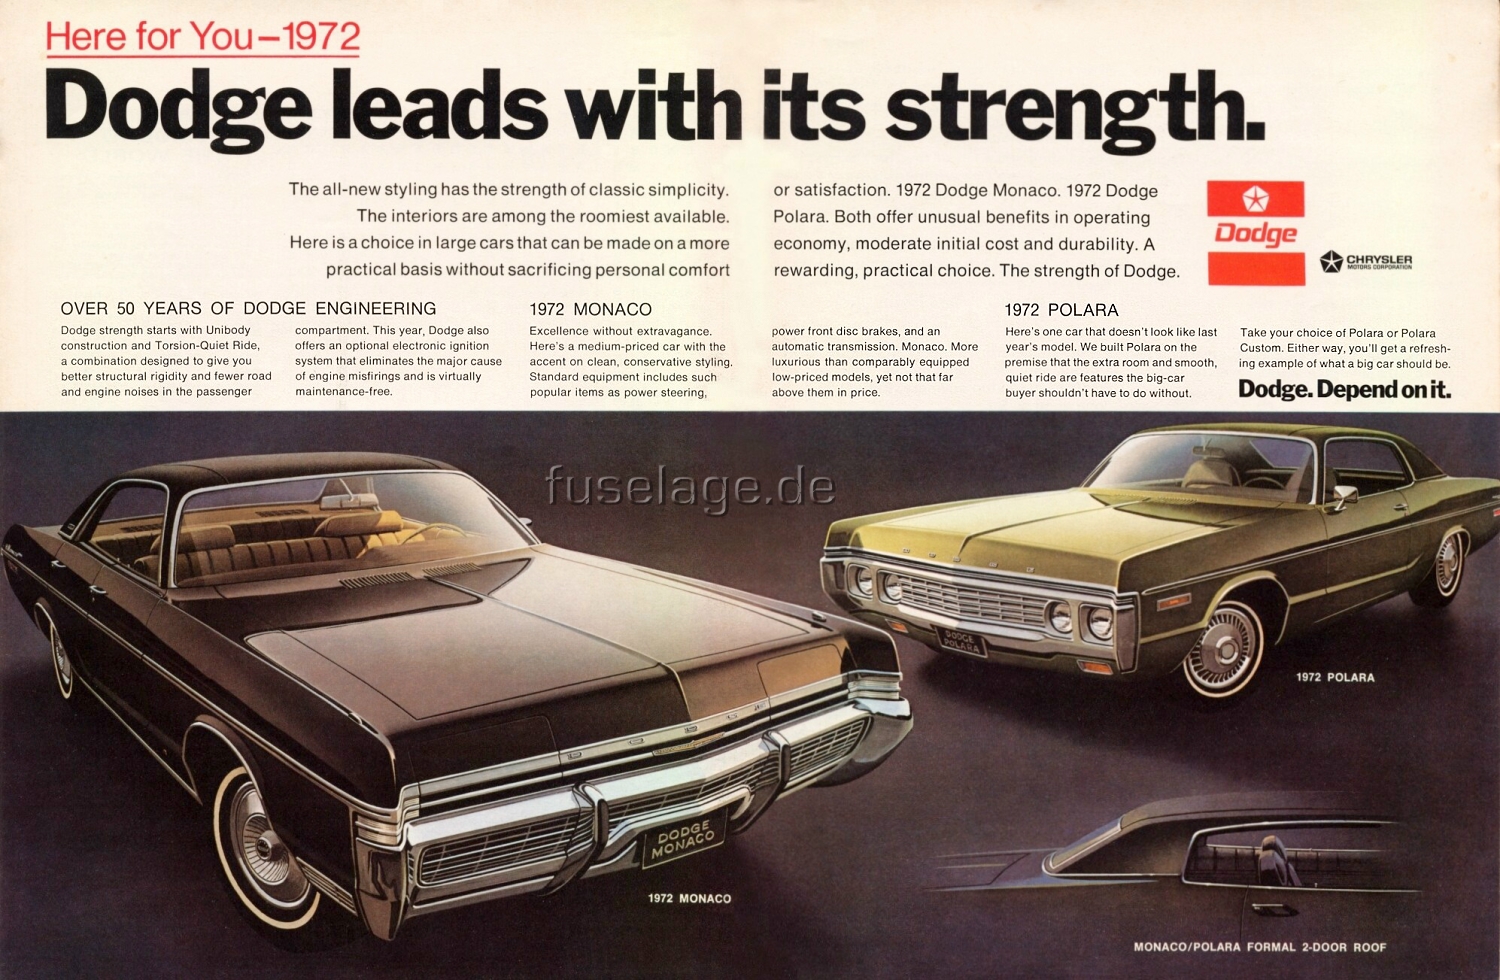 This ad was found in the November '71 issue of the Manufacturer's own Â»Dodge